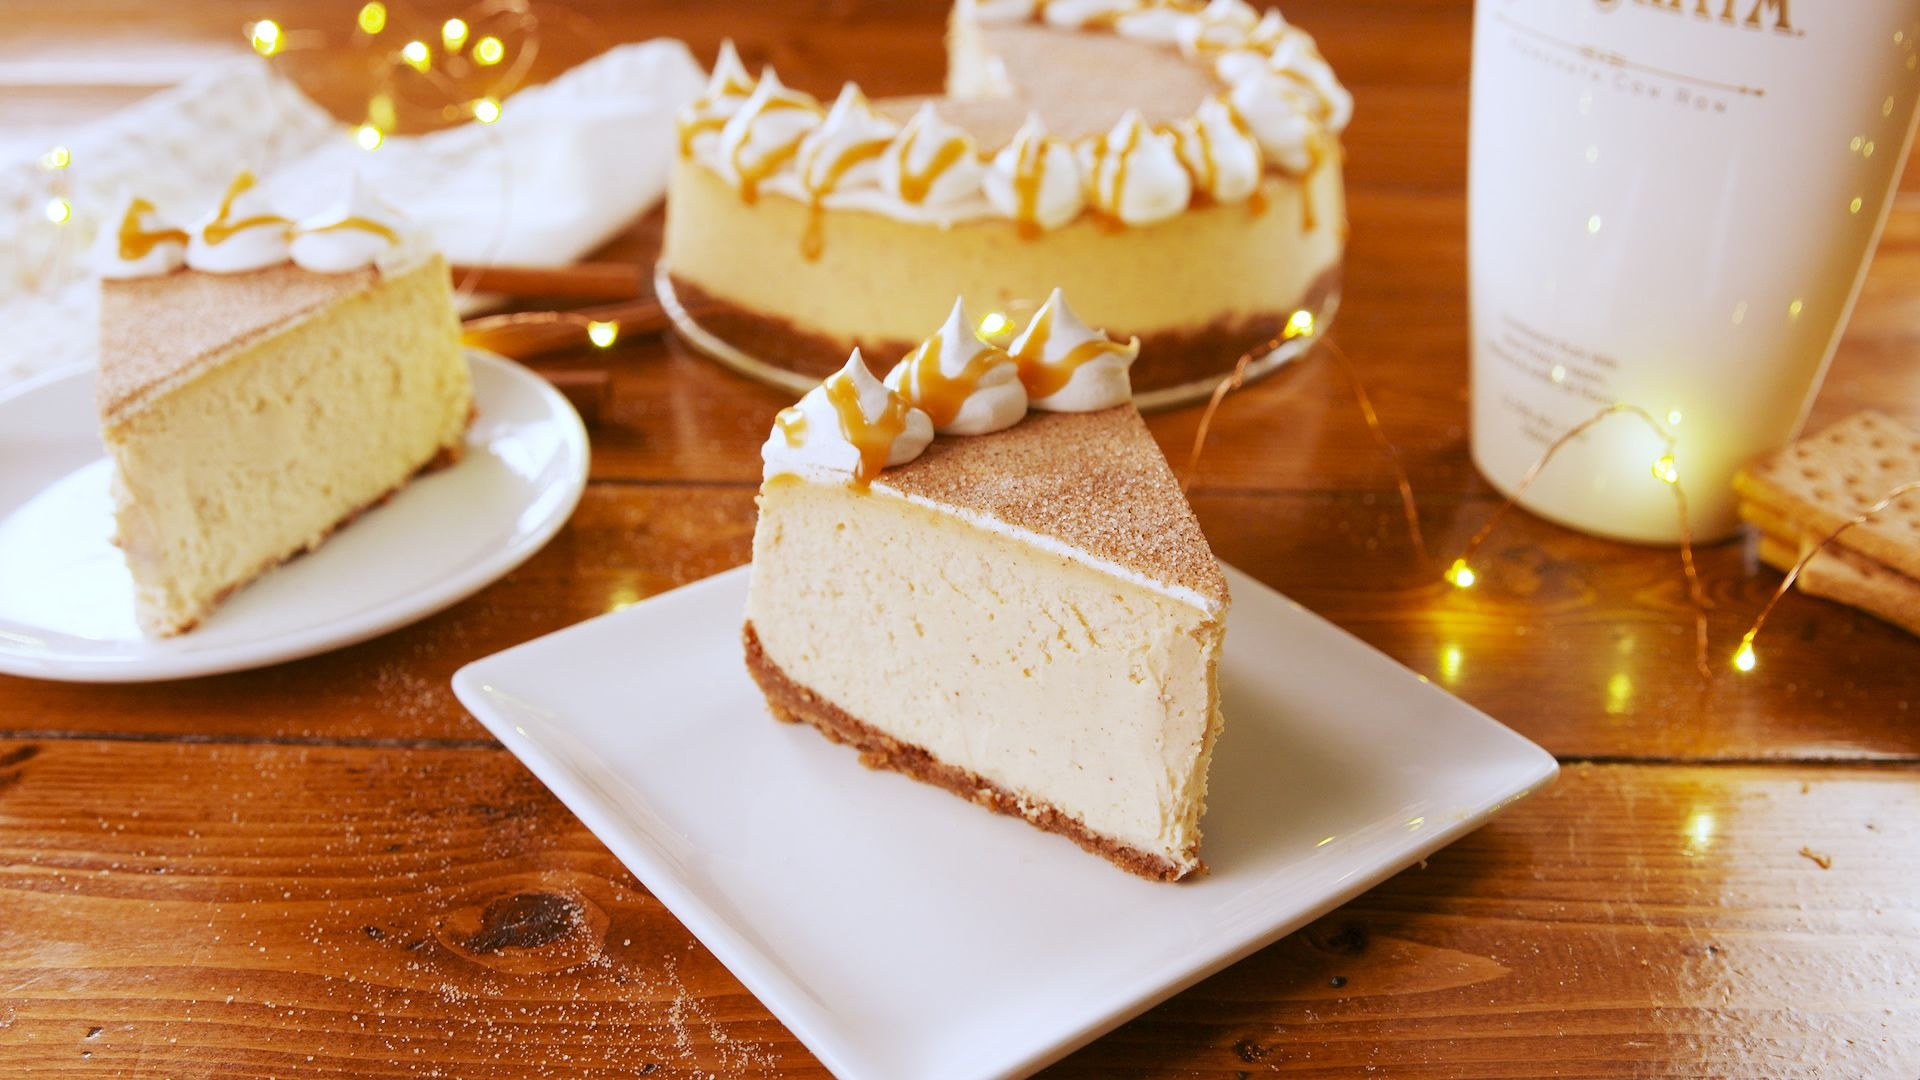 Cheesecake: Very creamy and sweet without the texture of a cake. 1920x1080 Full HD Background.